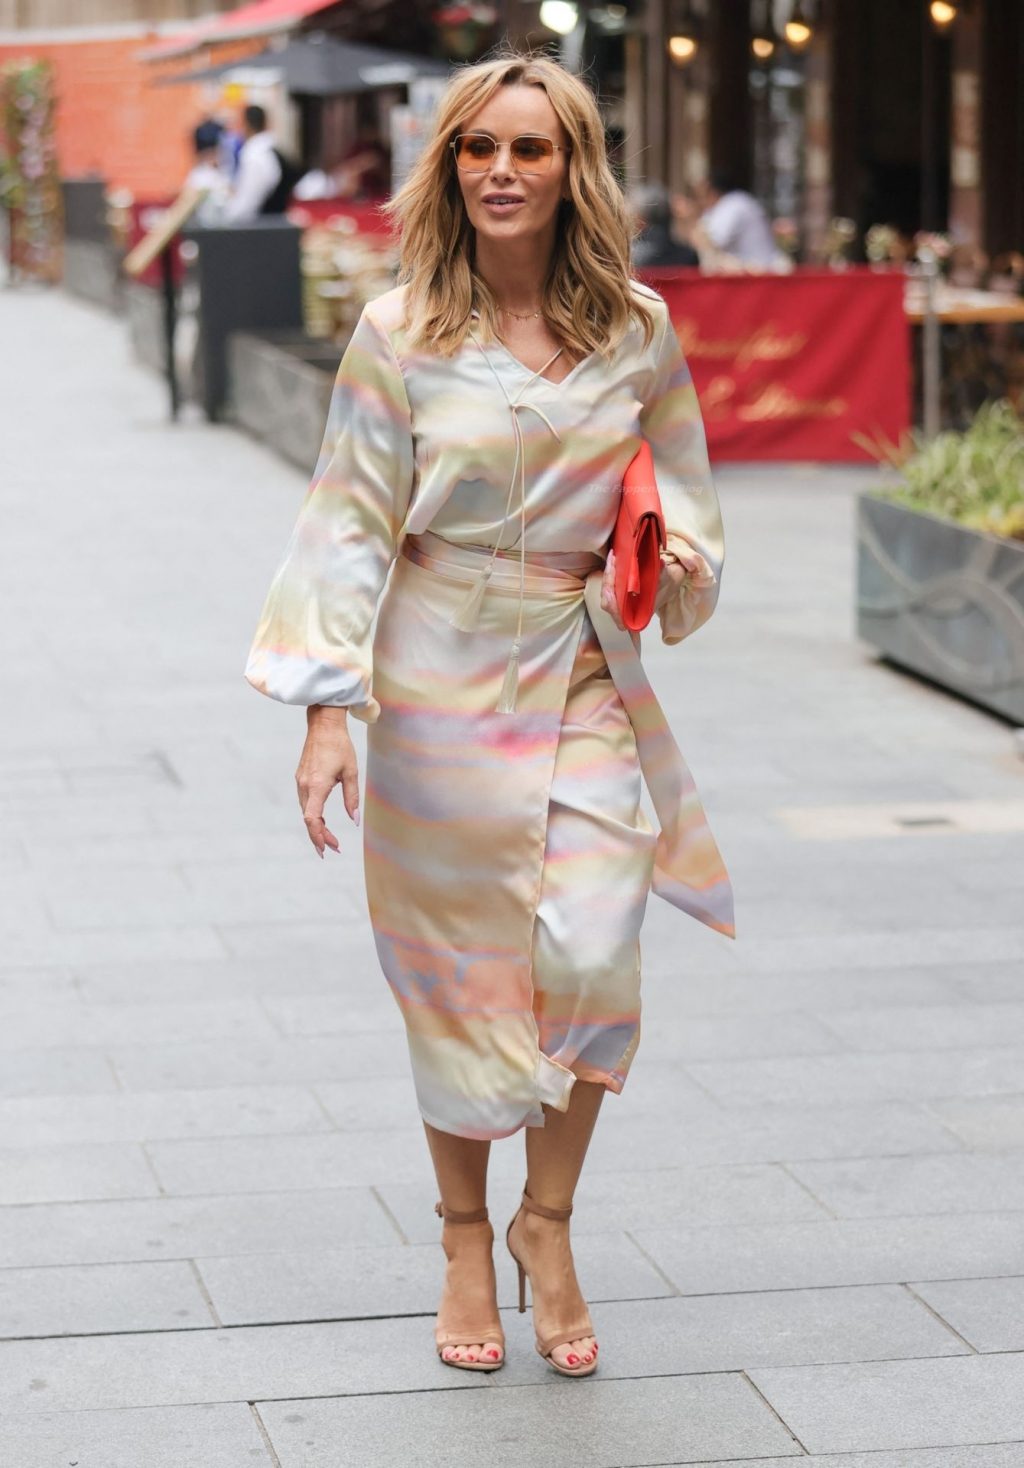 Amanda Holden Makes a Stylish Appearance Wearing an Oriental Style Wrap Dress at Heart Radio (17 Photos)